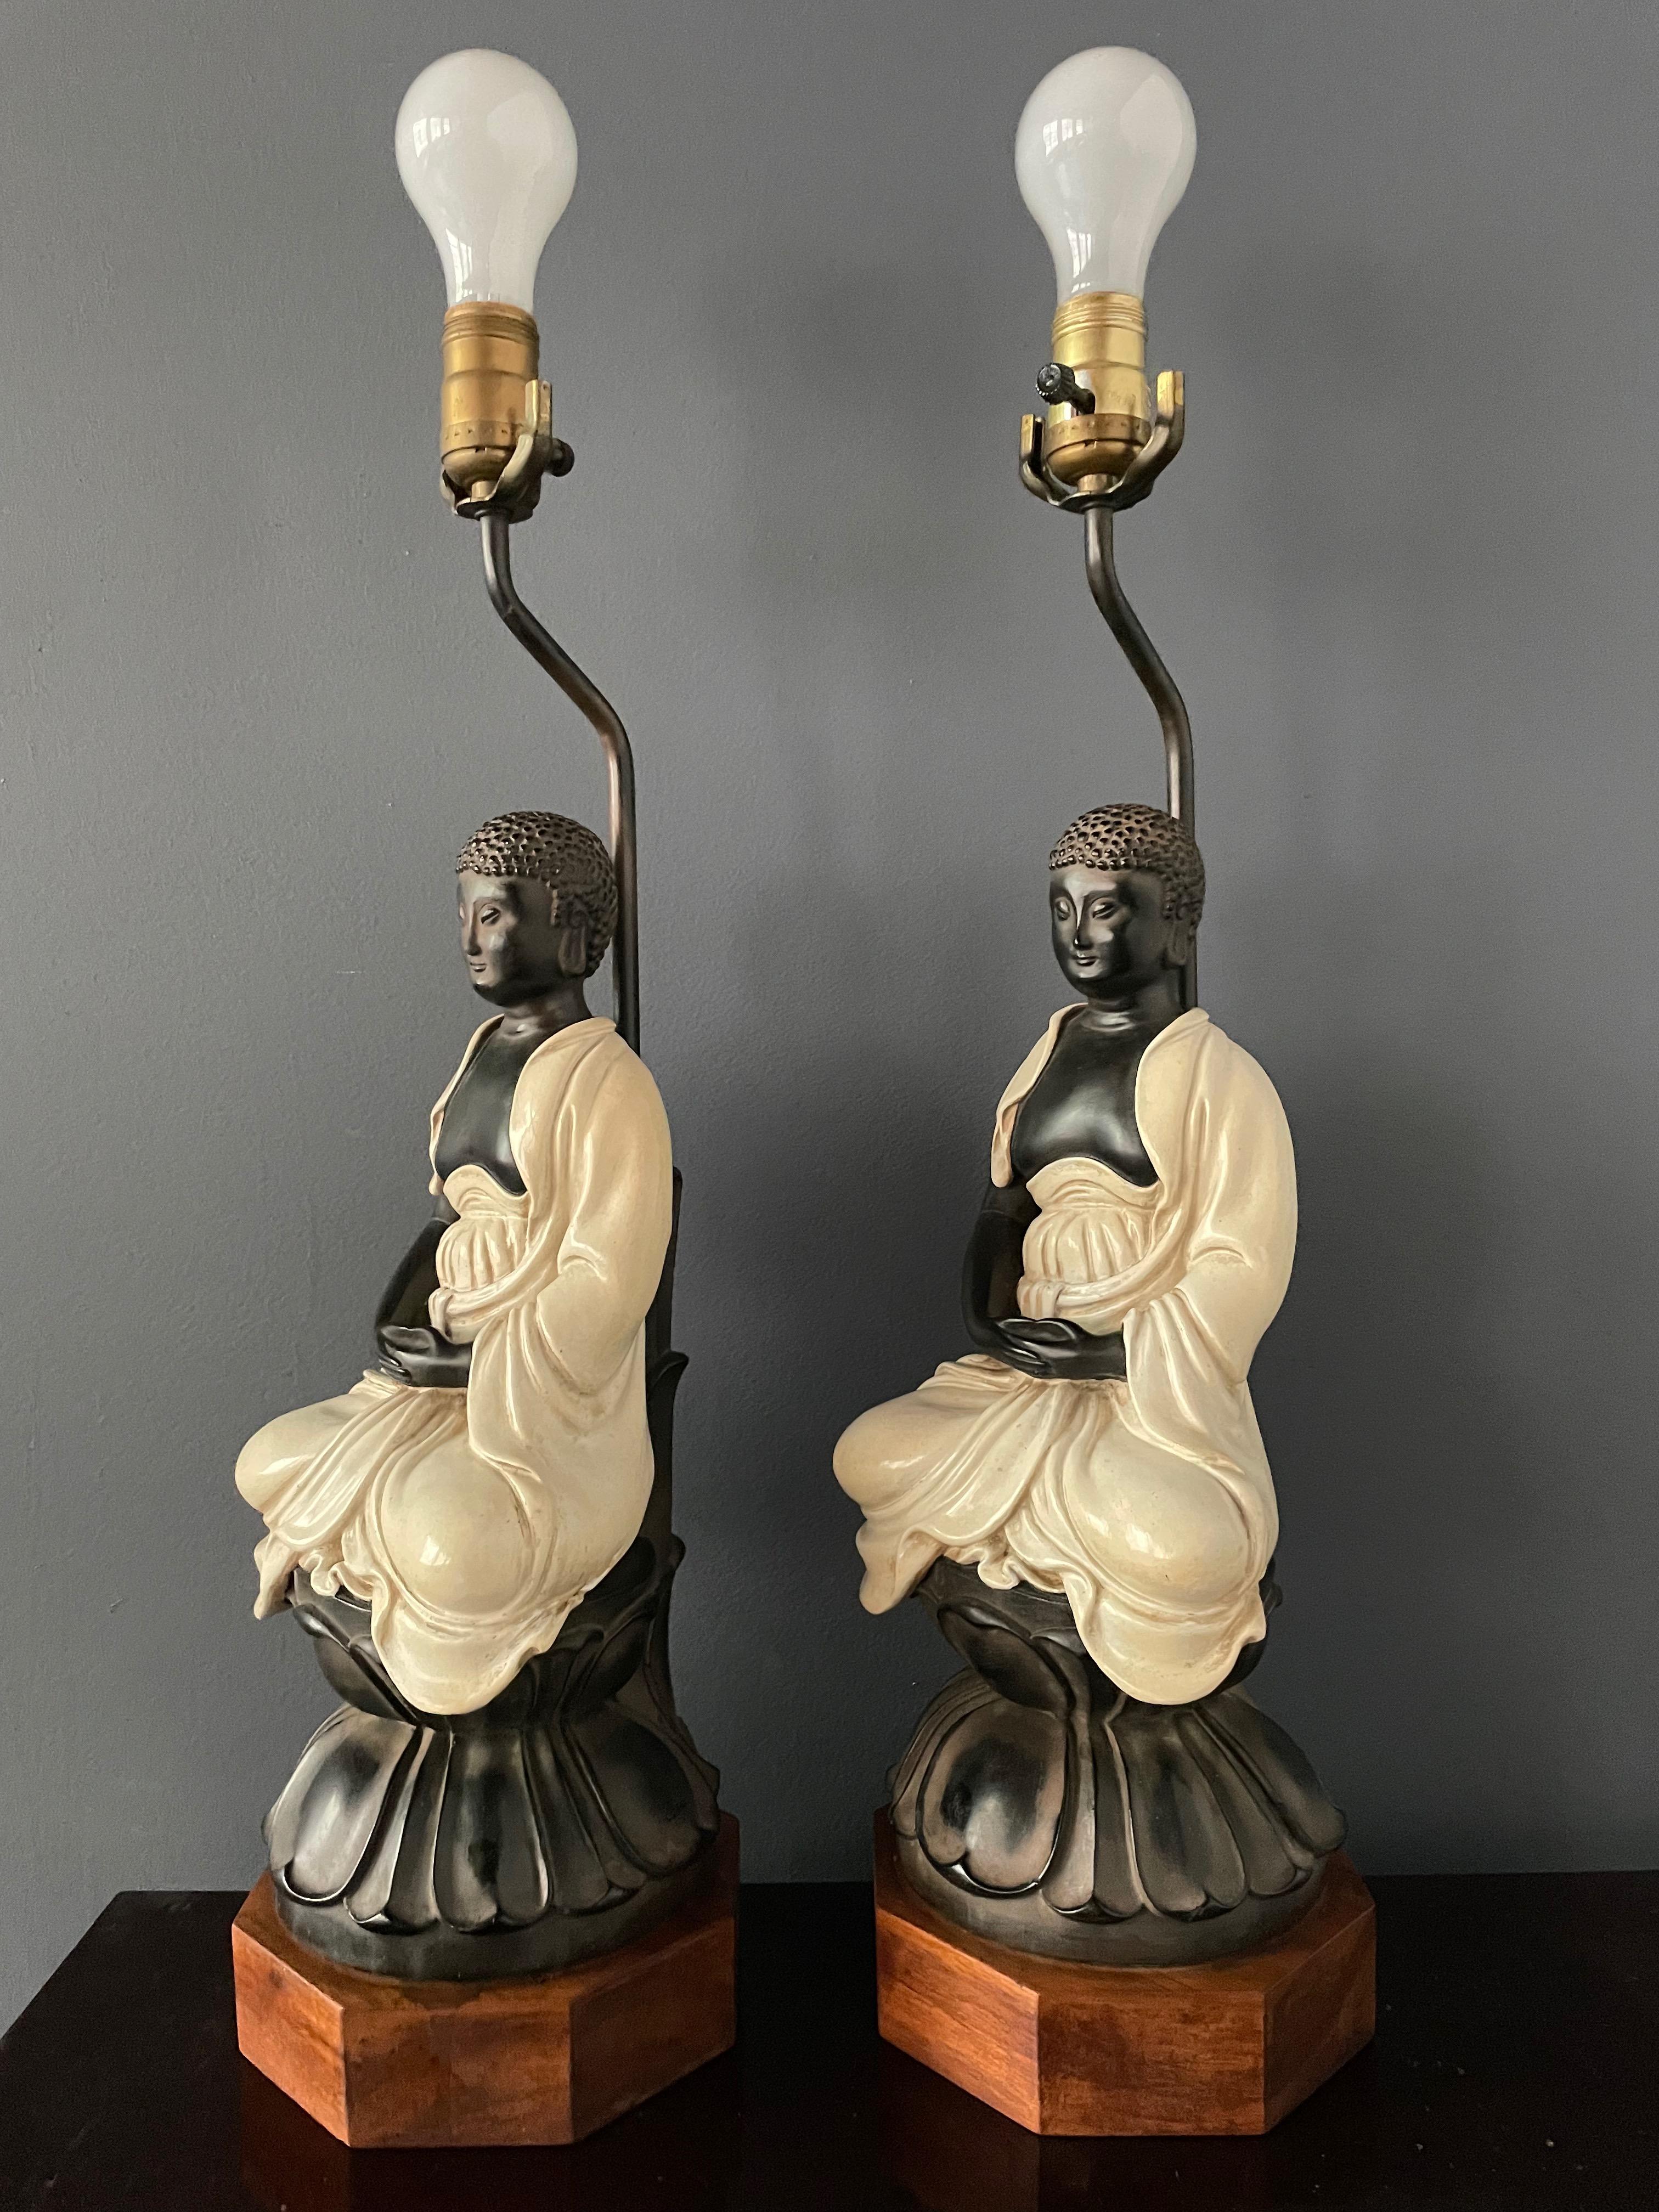 A very interesting pair of ceramic table lamps in the form of a buddha sitting on a rosewood base.